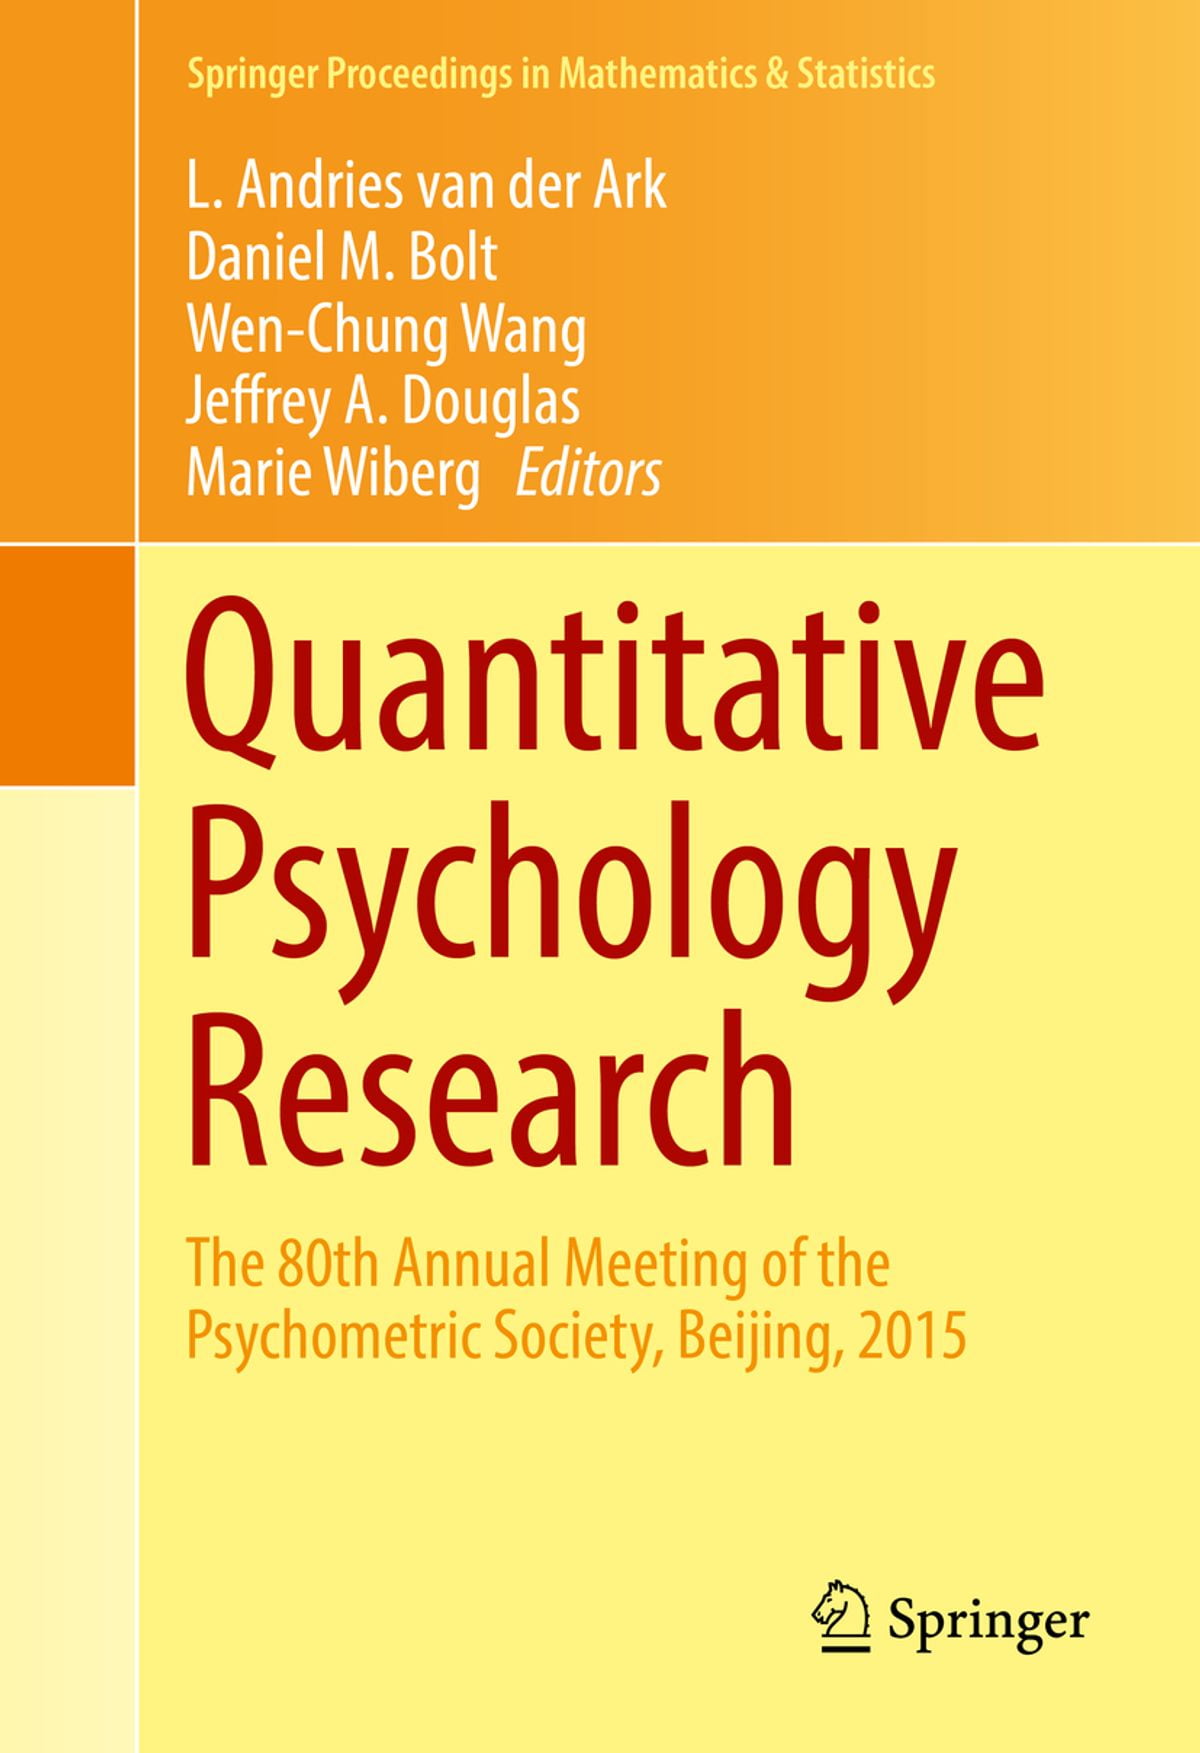 importance of quantitative research in psychology